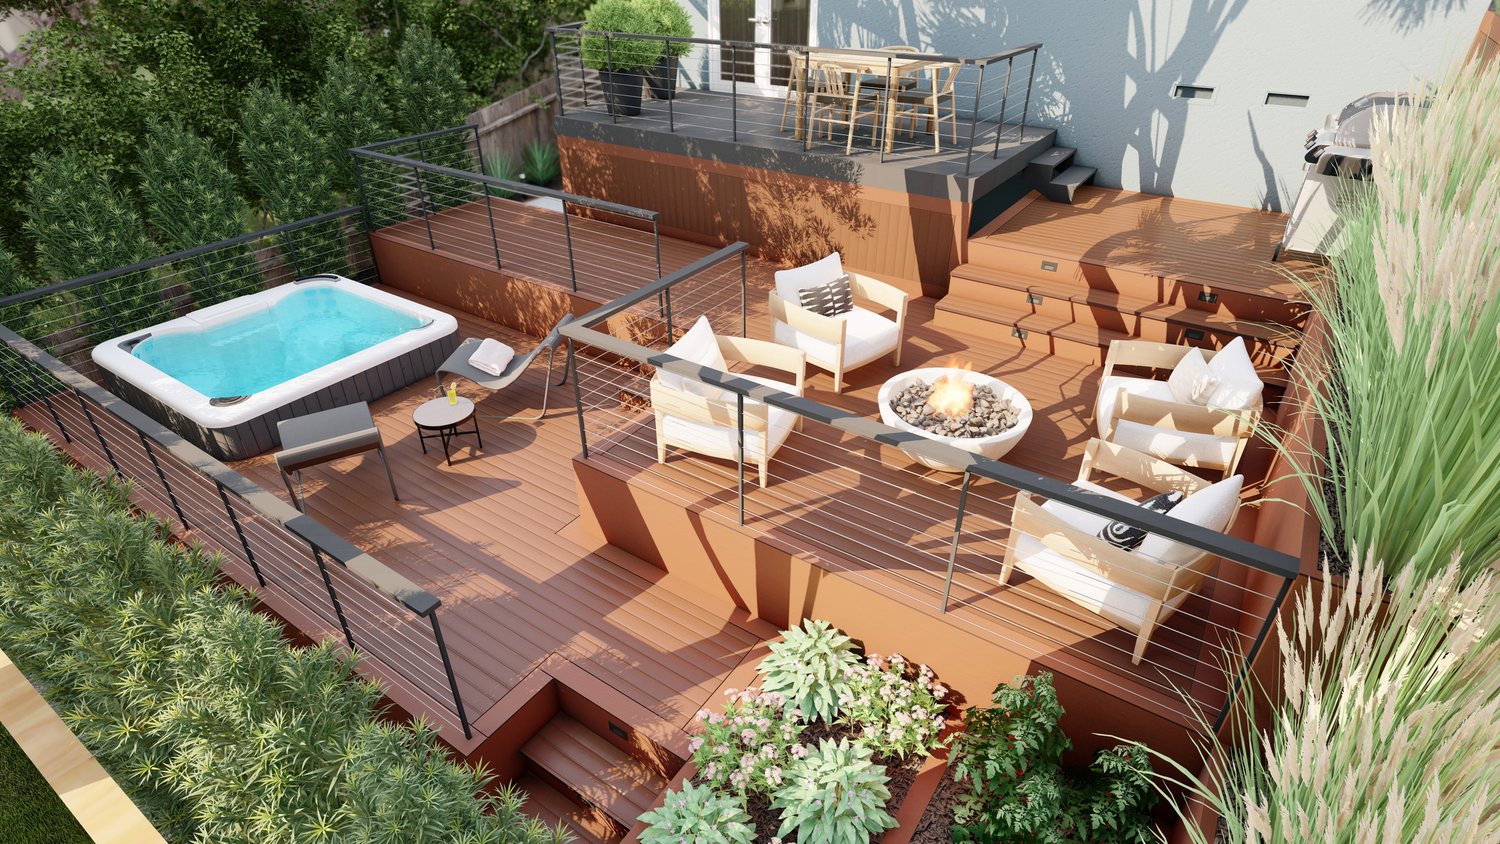 San Francisco overhead view of deck patio with swimming, fire pit and dining area